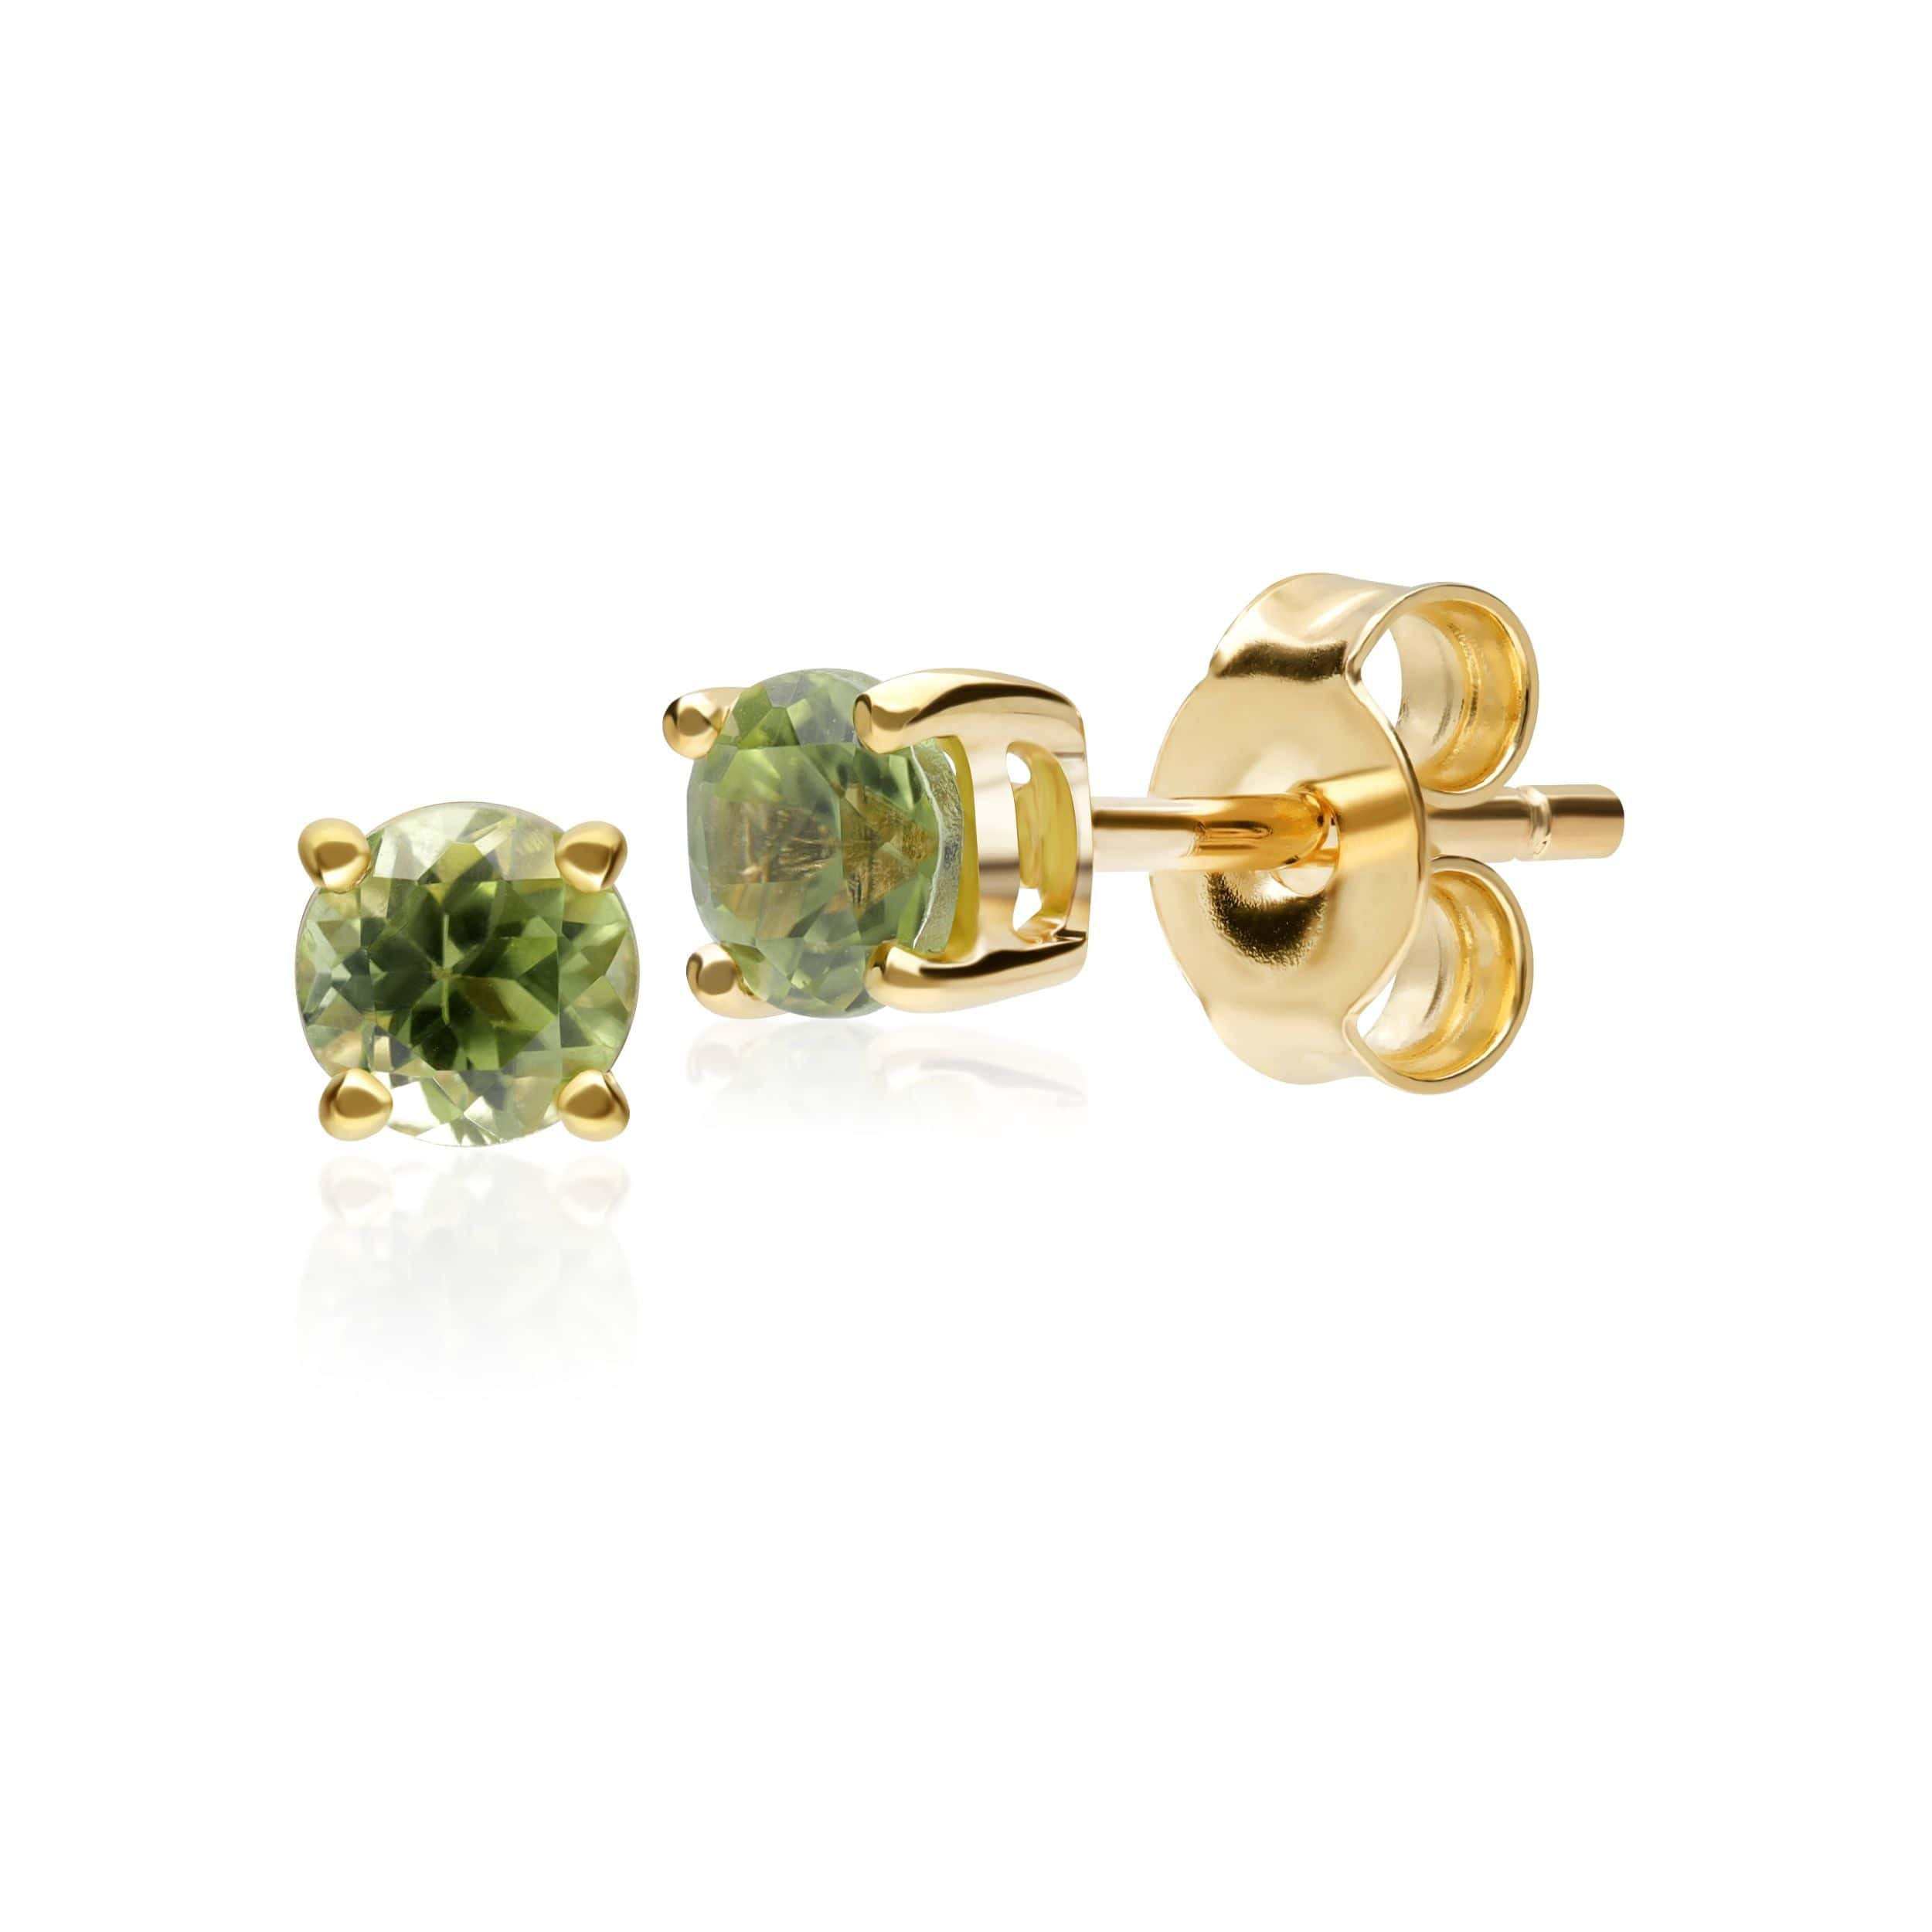 Classic Round Peridot Stud Earrings in 9ct Yellow Gold